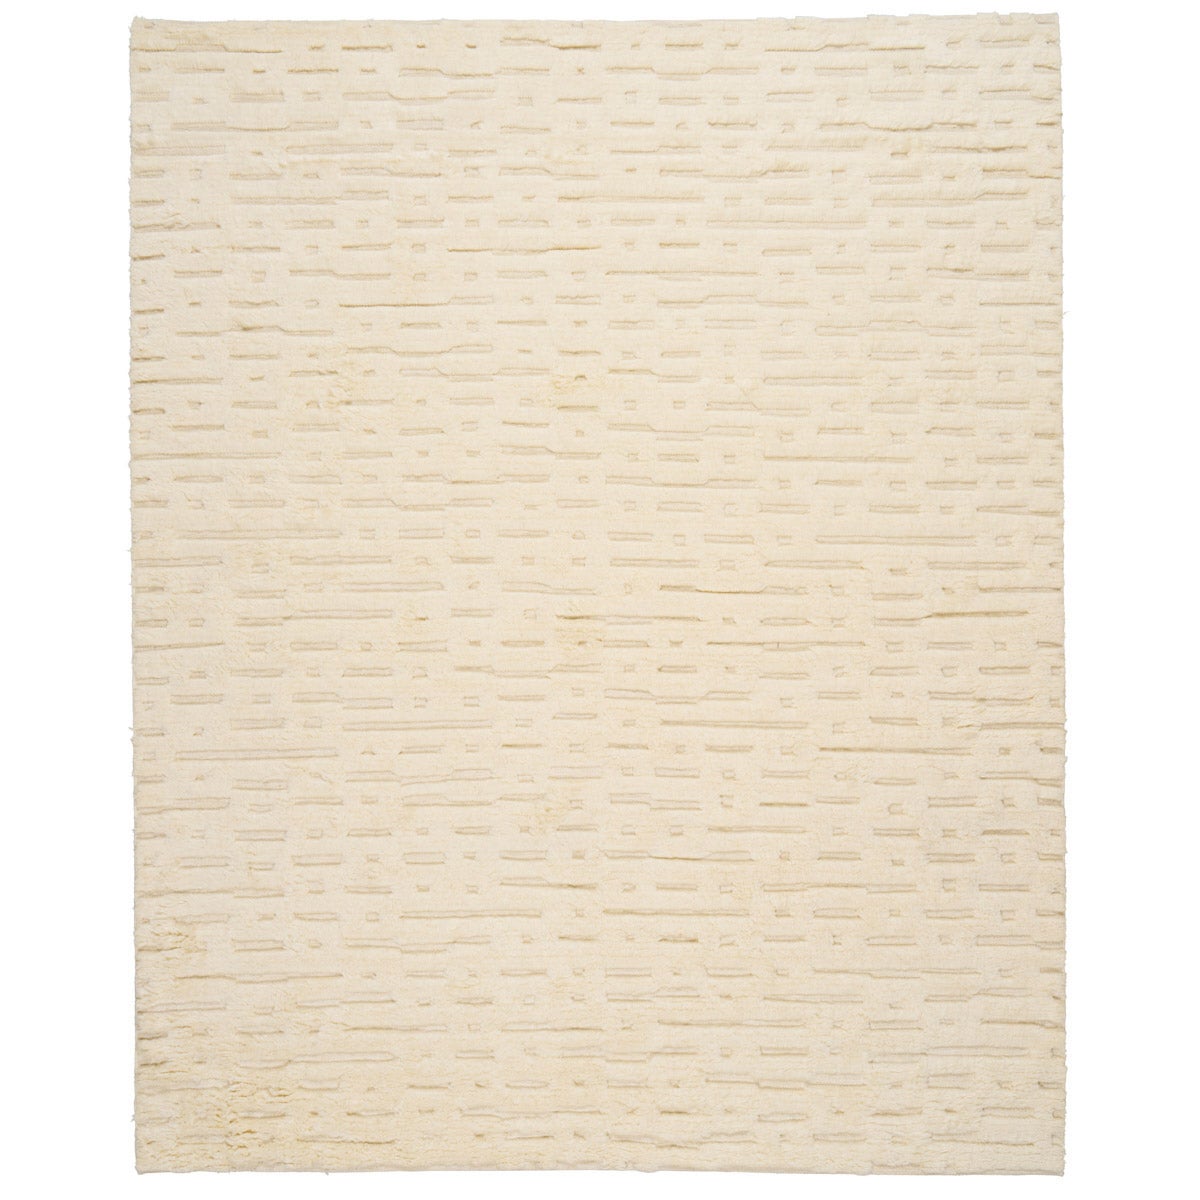 Schumacher Abstract Ikat Rug in Ivory, 9x12' For Sale